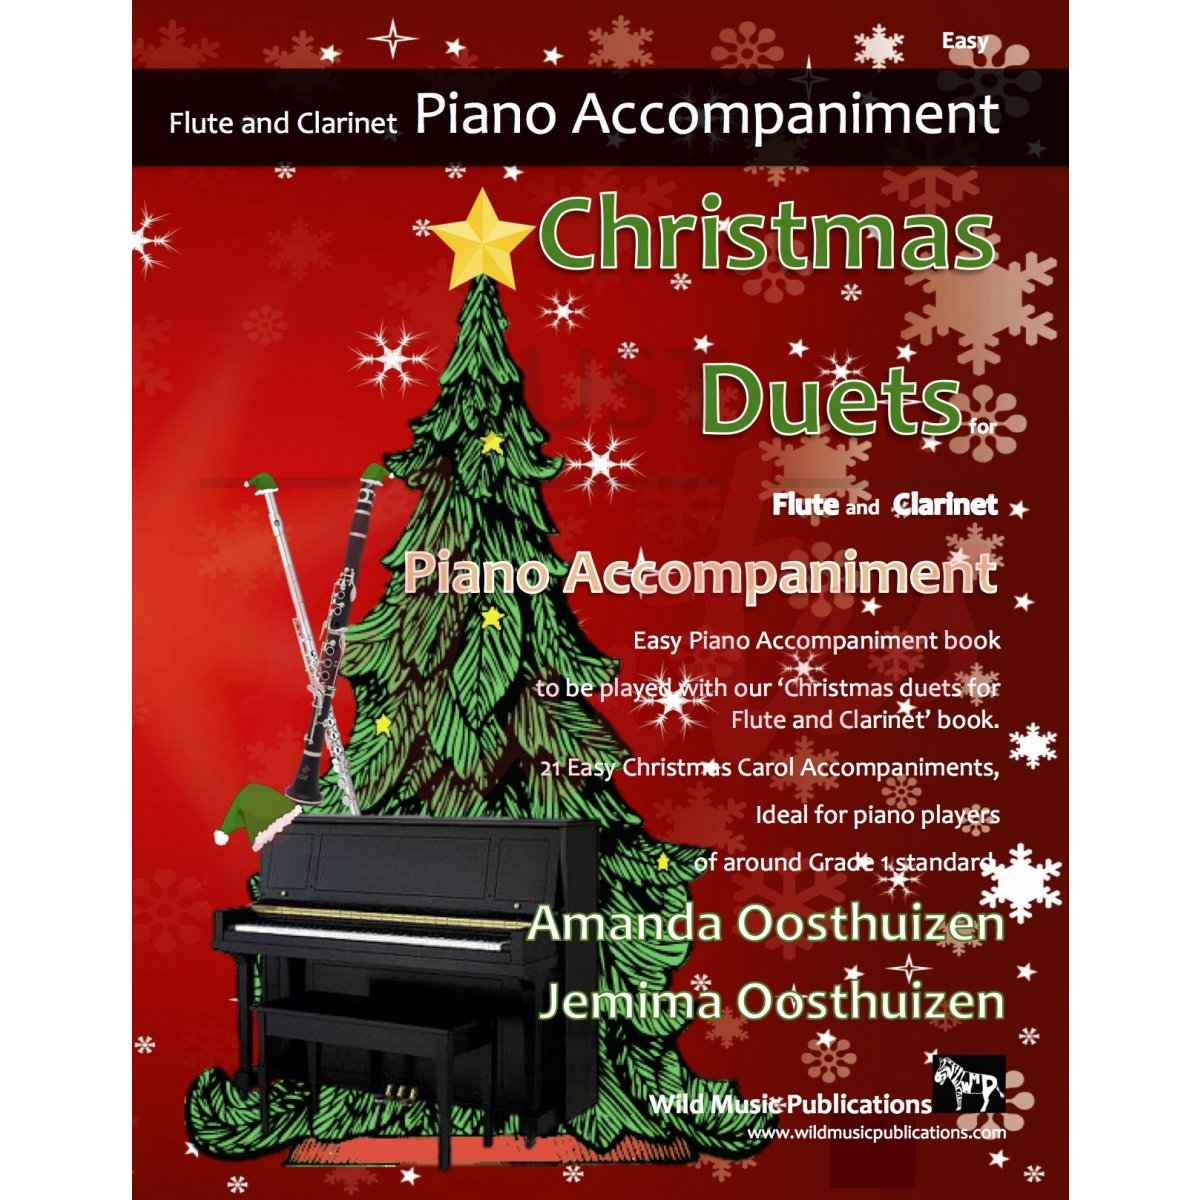 Christmas Duets for Flute and Clarinet – Piano Accompaniment